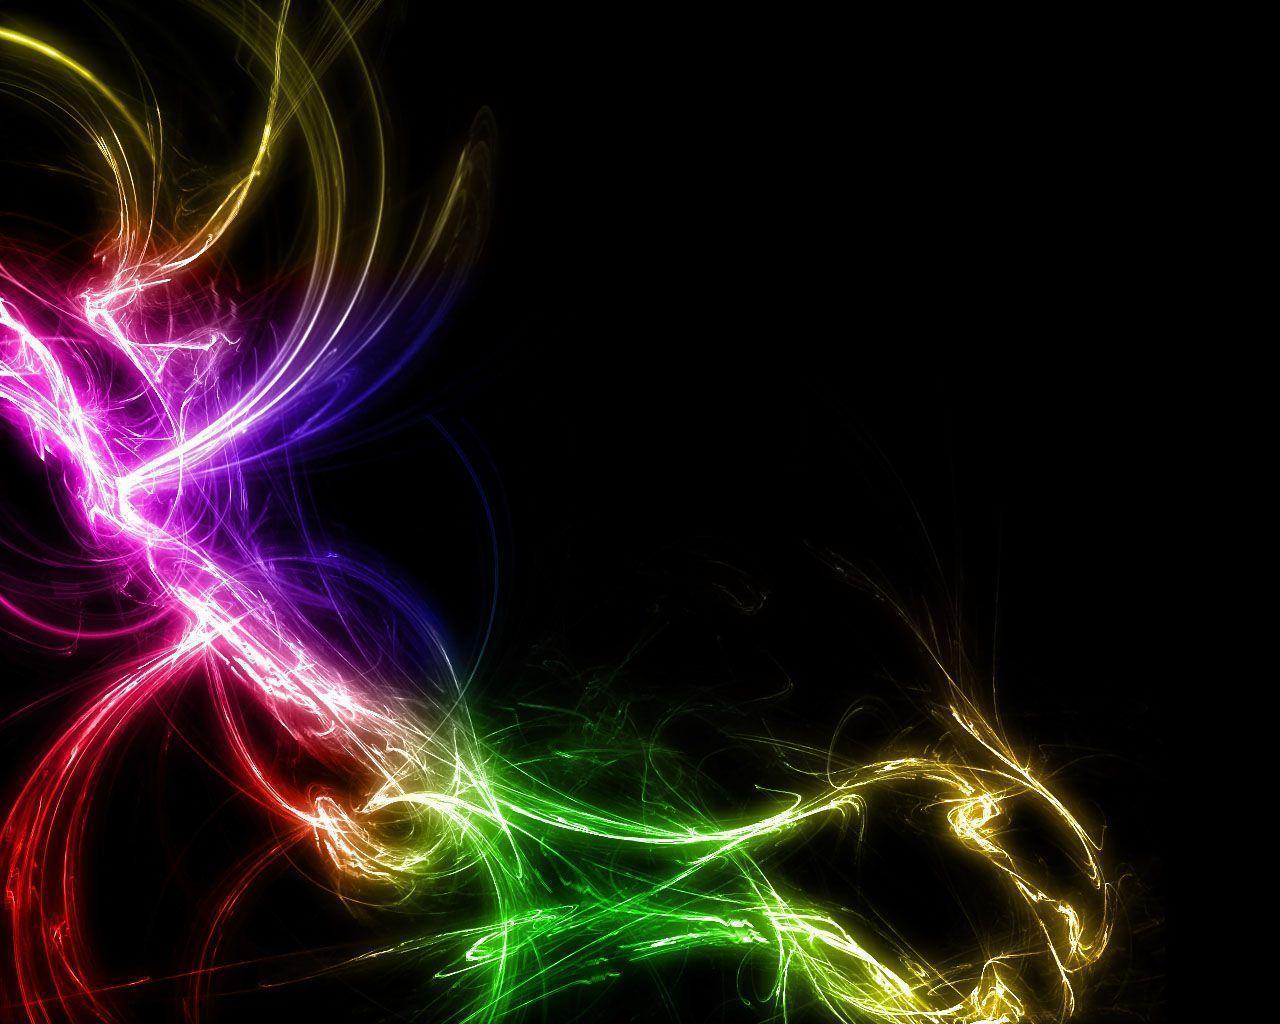 Abstract Background 11 15929 Image HD Wallpaper. Wallpaper